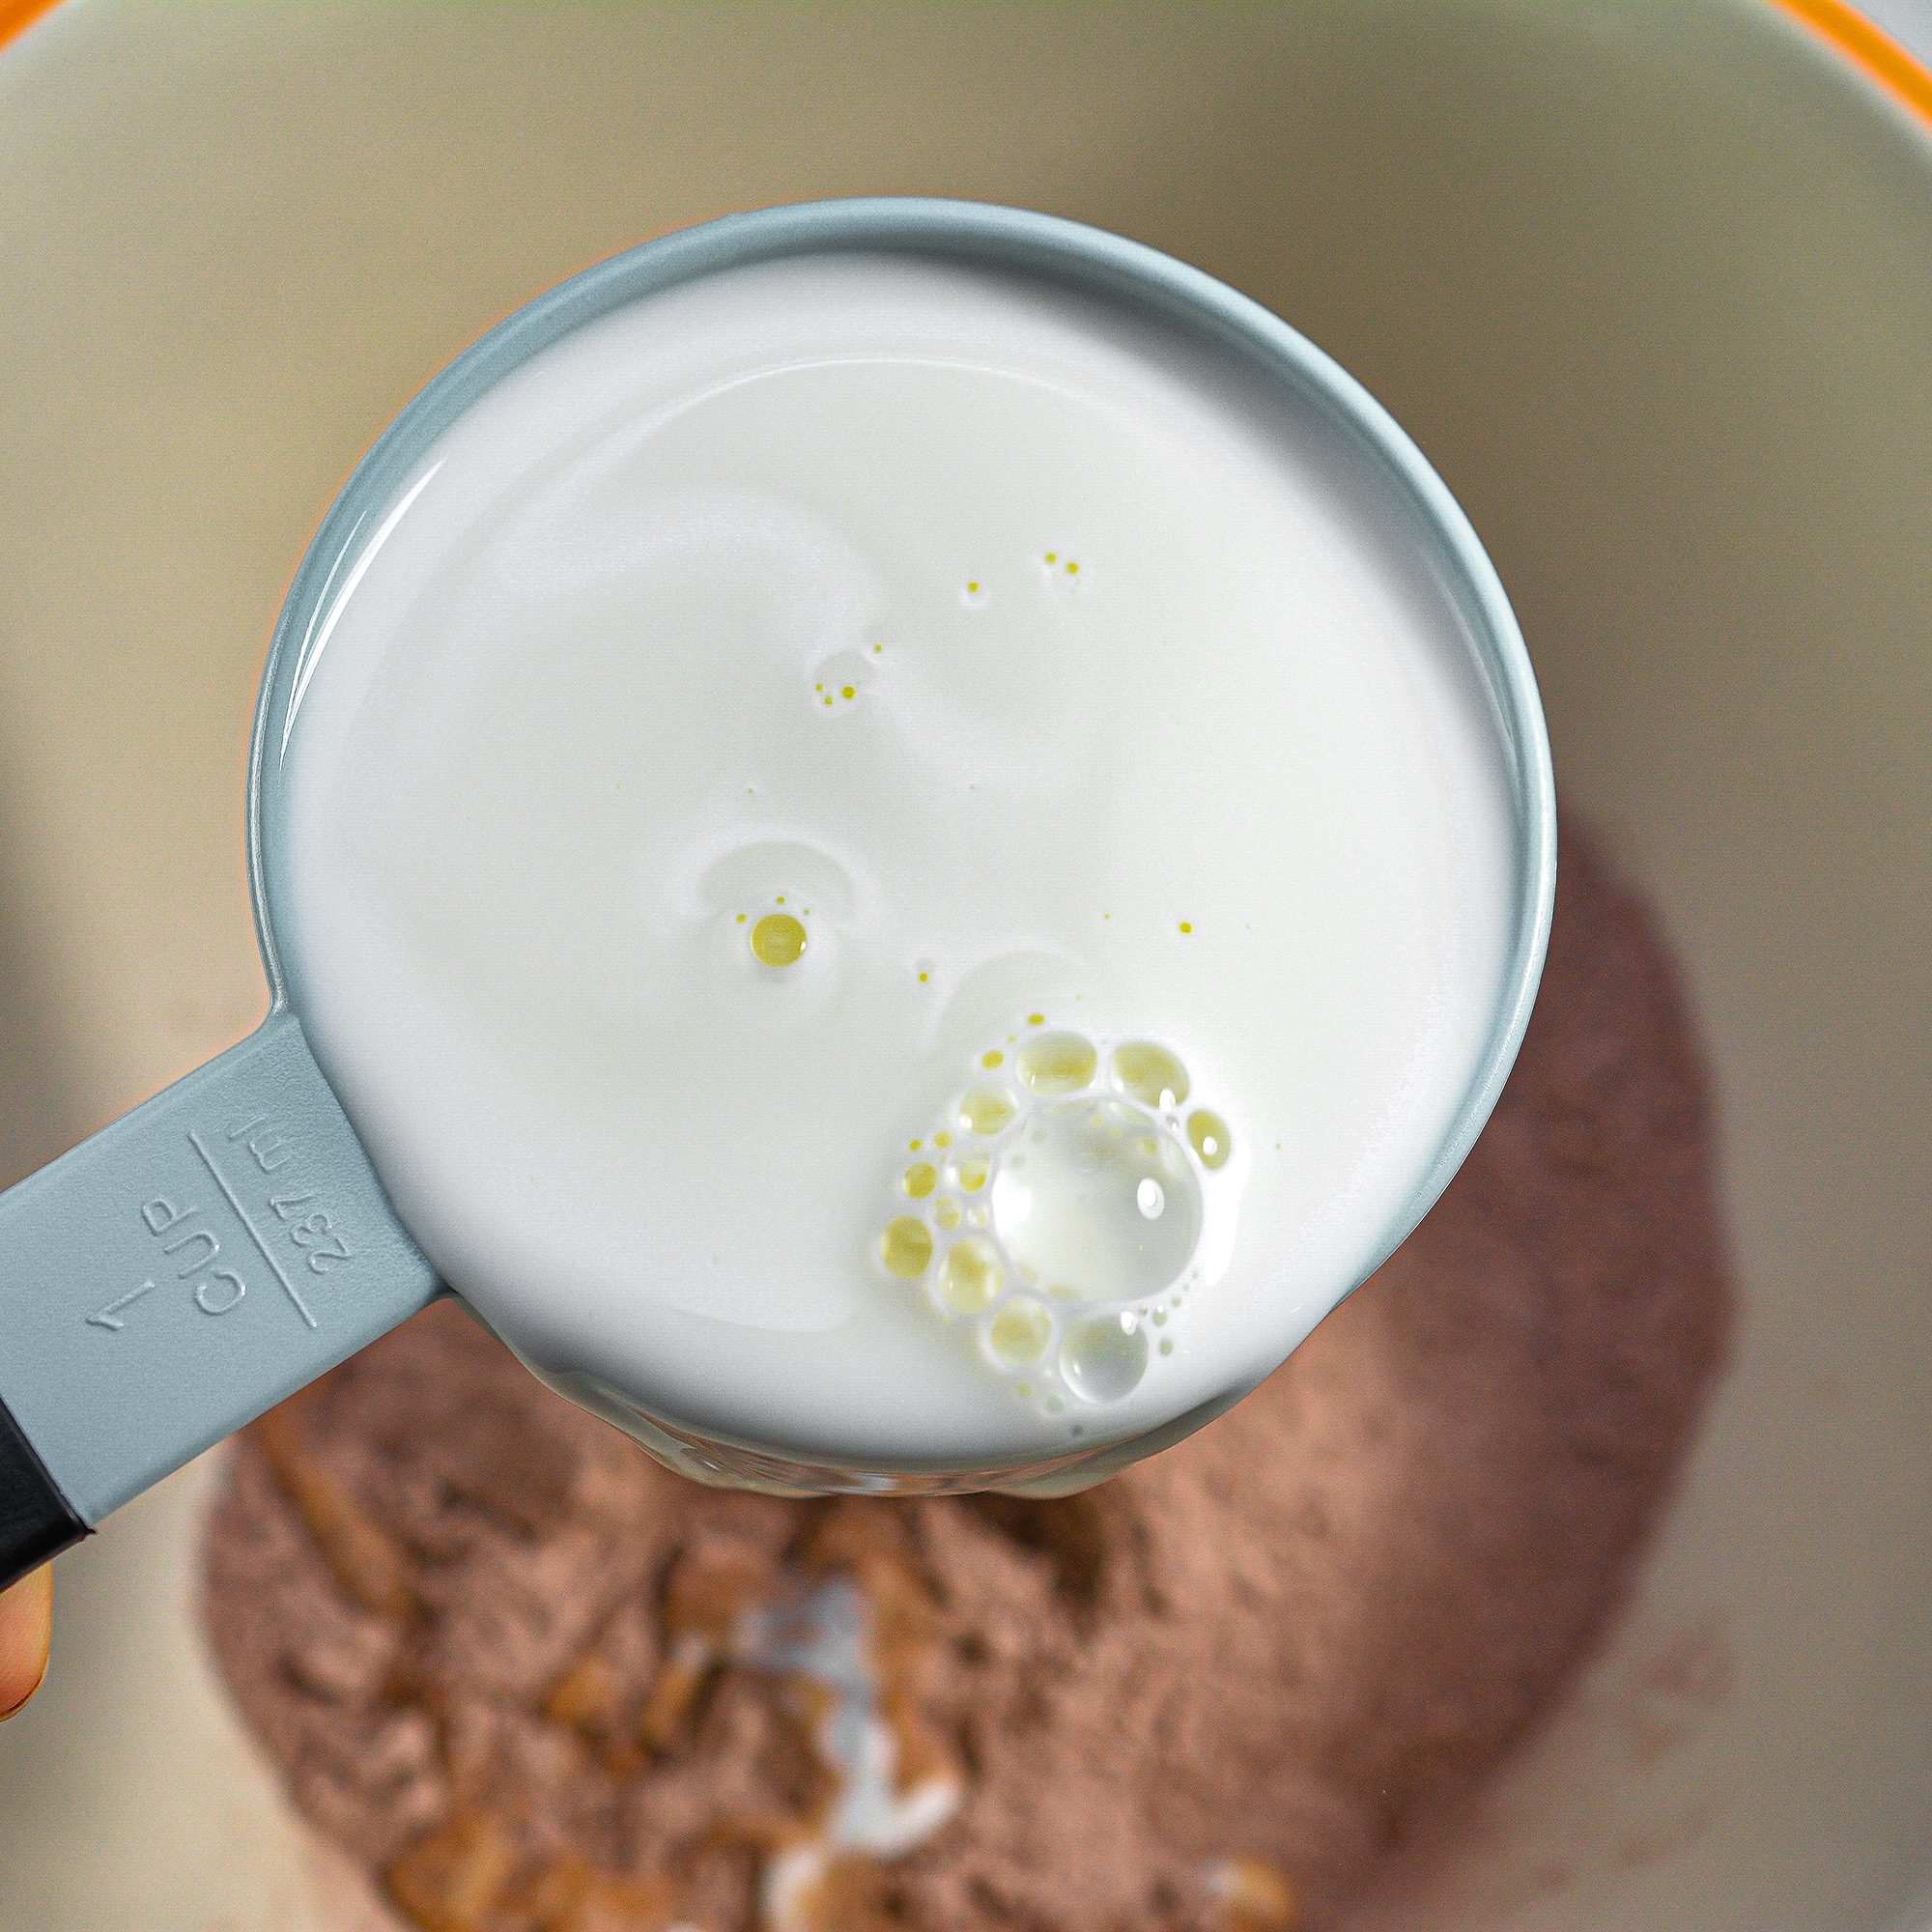 Place the instant chocolate pudding and the milk into a large mixing bowl, and whisk to combine until smooth. Let set for 5 minutes.